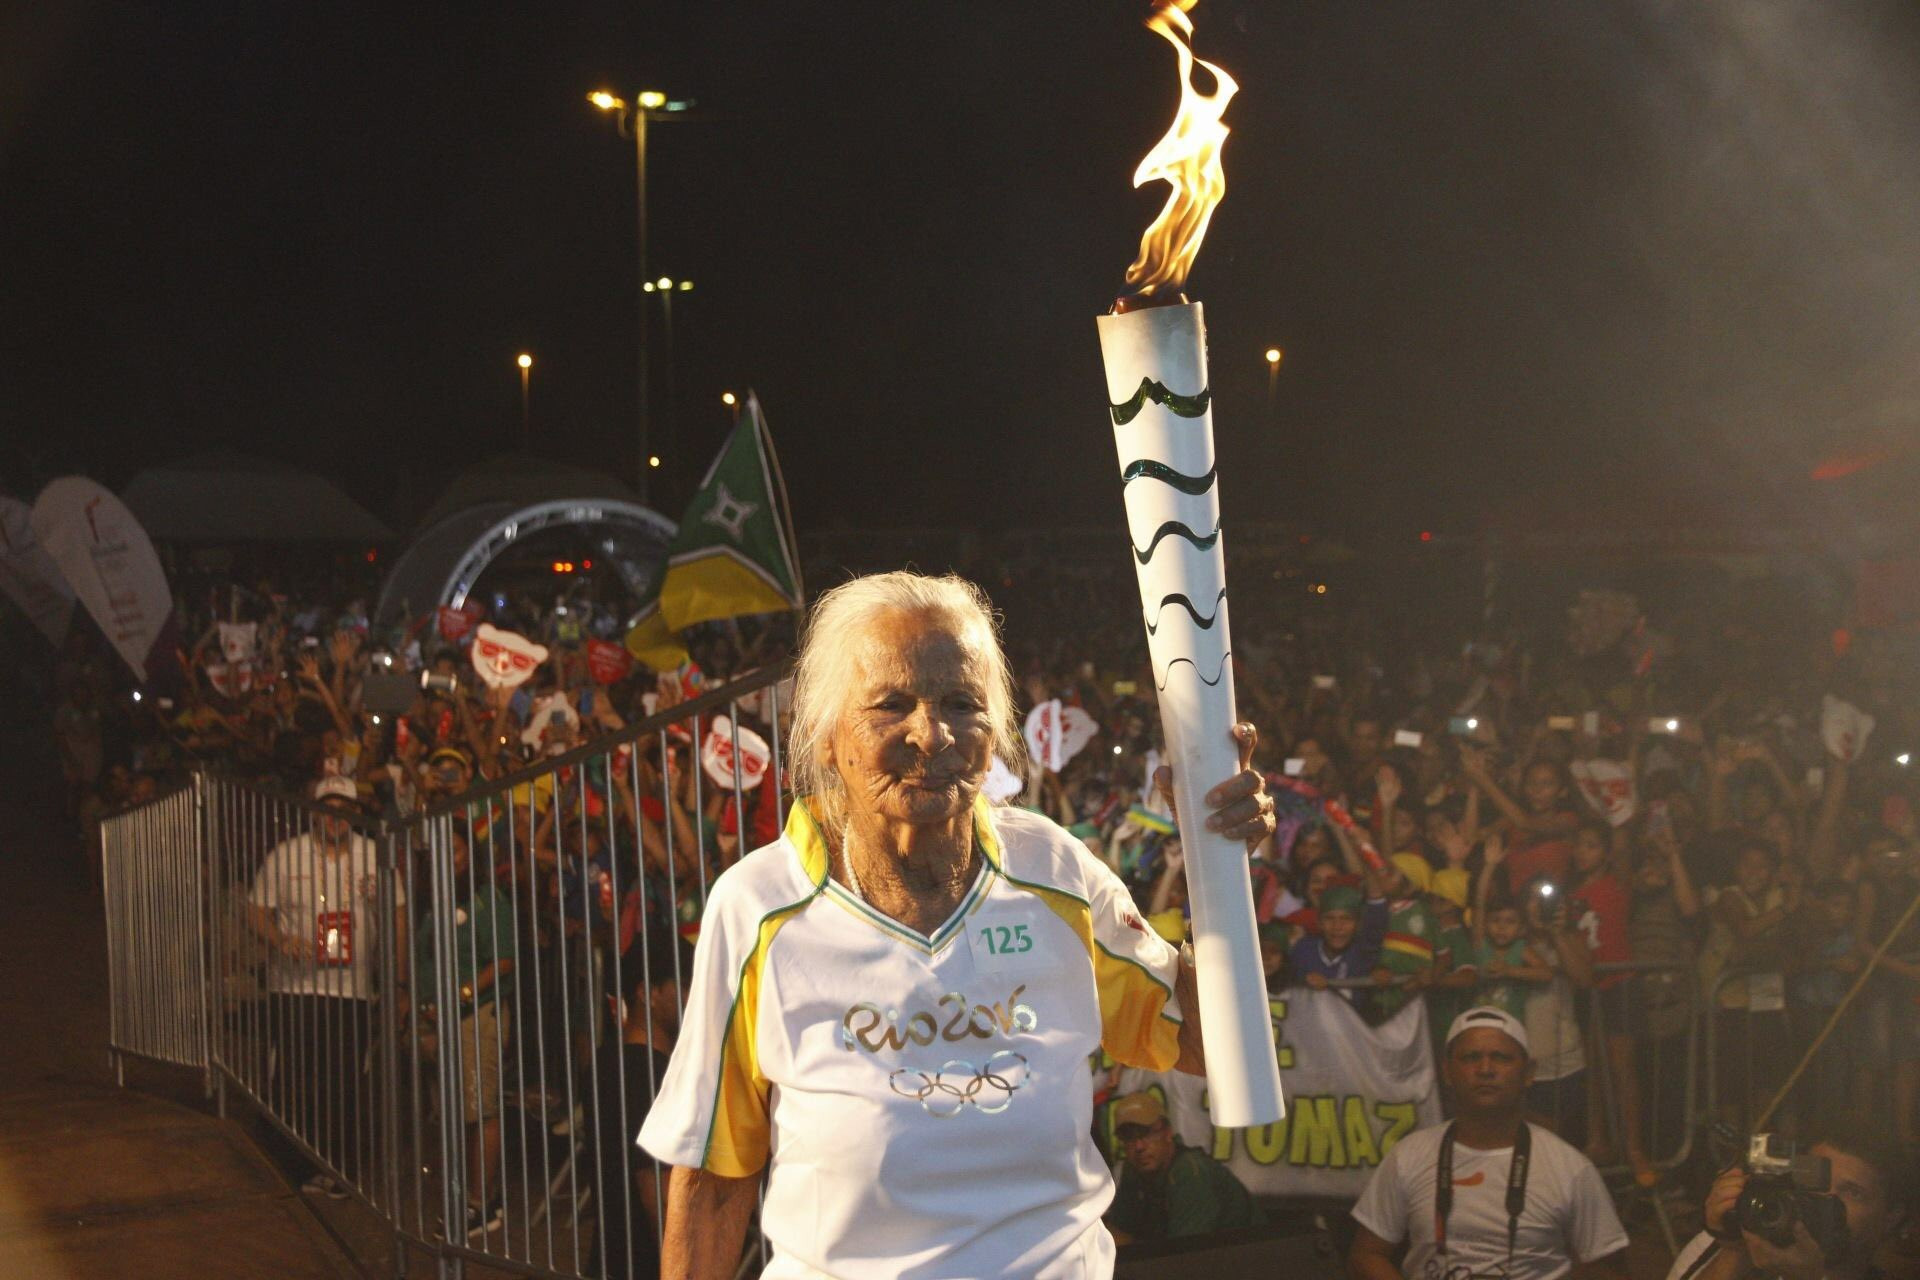 If Kane Tanaka carries the Torch as part of next year's rescheduled Relay, she would succeed Aida Mendes, 107, as the oldest Torchbearer ©Rio 2016